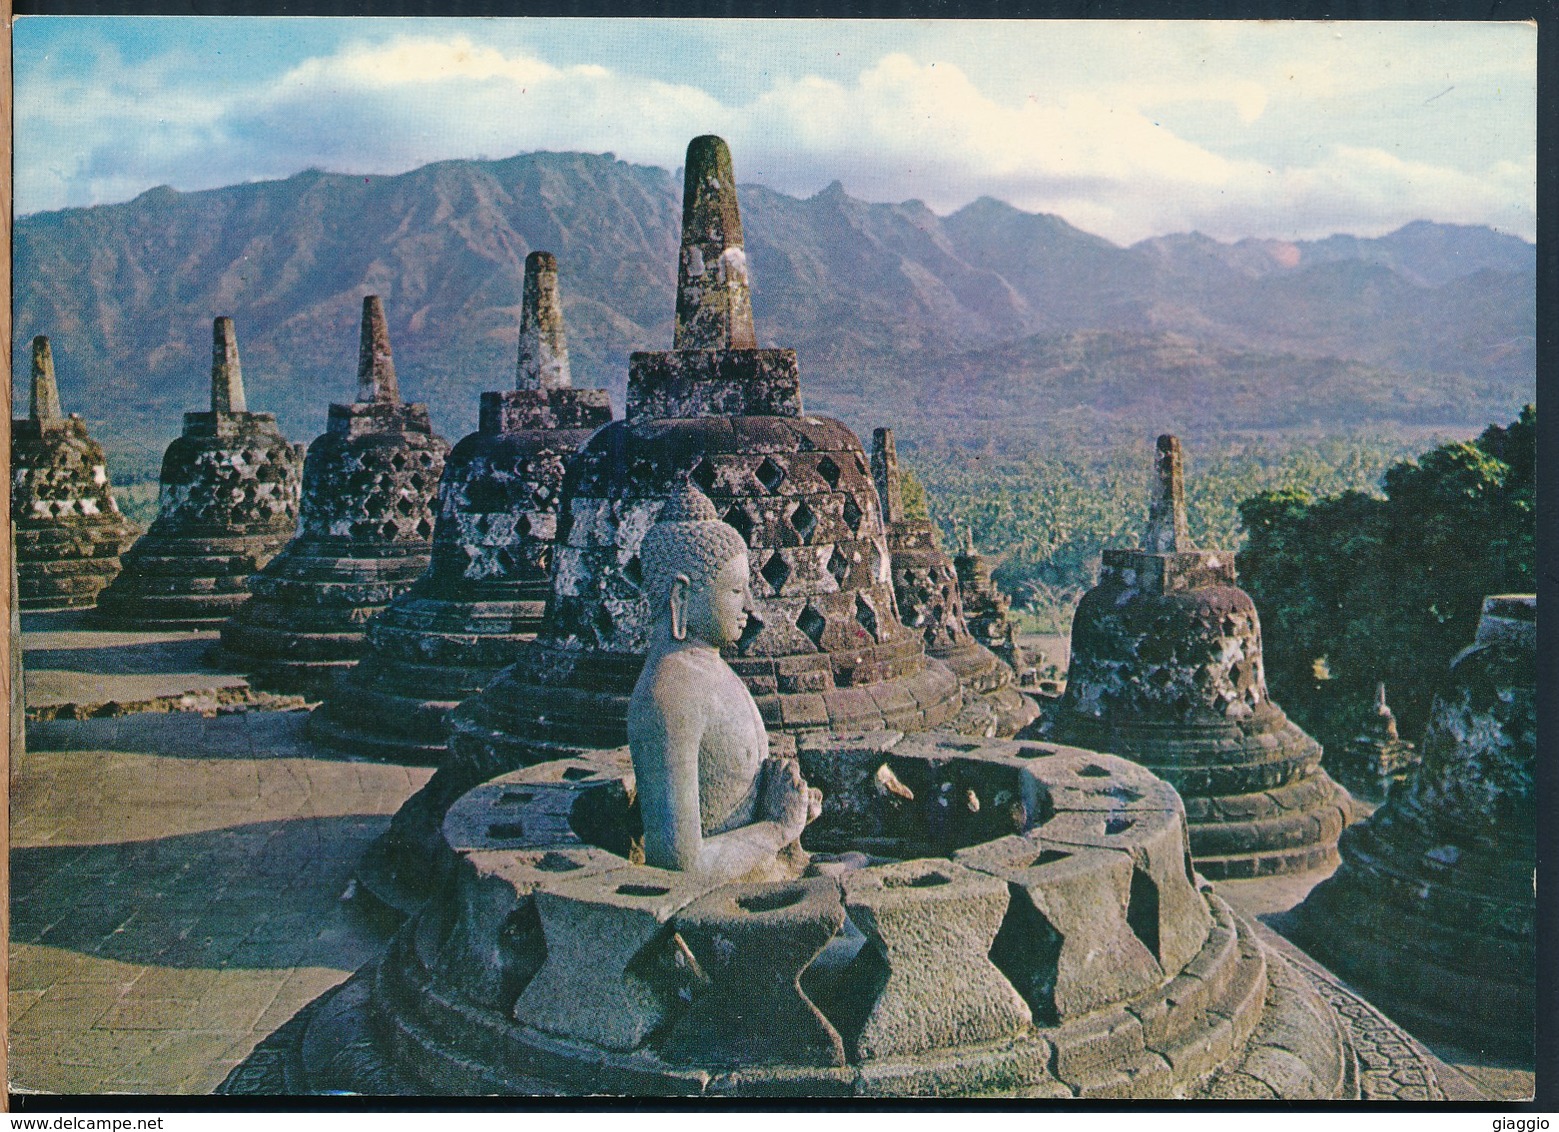 °°° 20273 - INDONESIA - OPEN STUPA WITH A BUDDHA , TEMPLE BOROBUDUR IN CENTRAL JAVA - 1995 With Stamps °°° - Indonesia